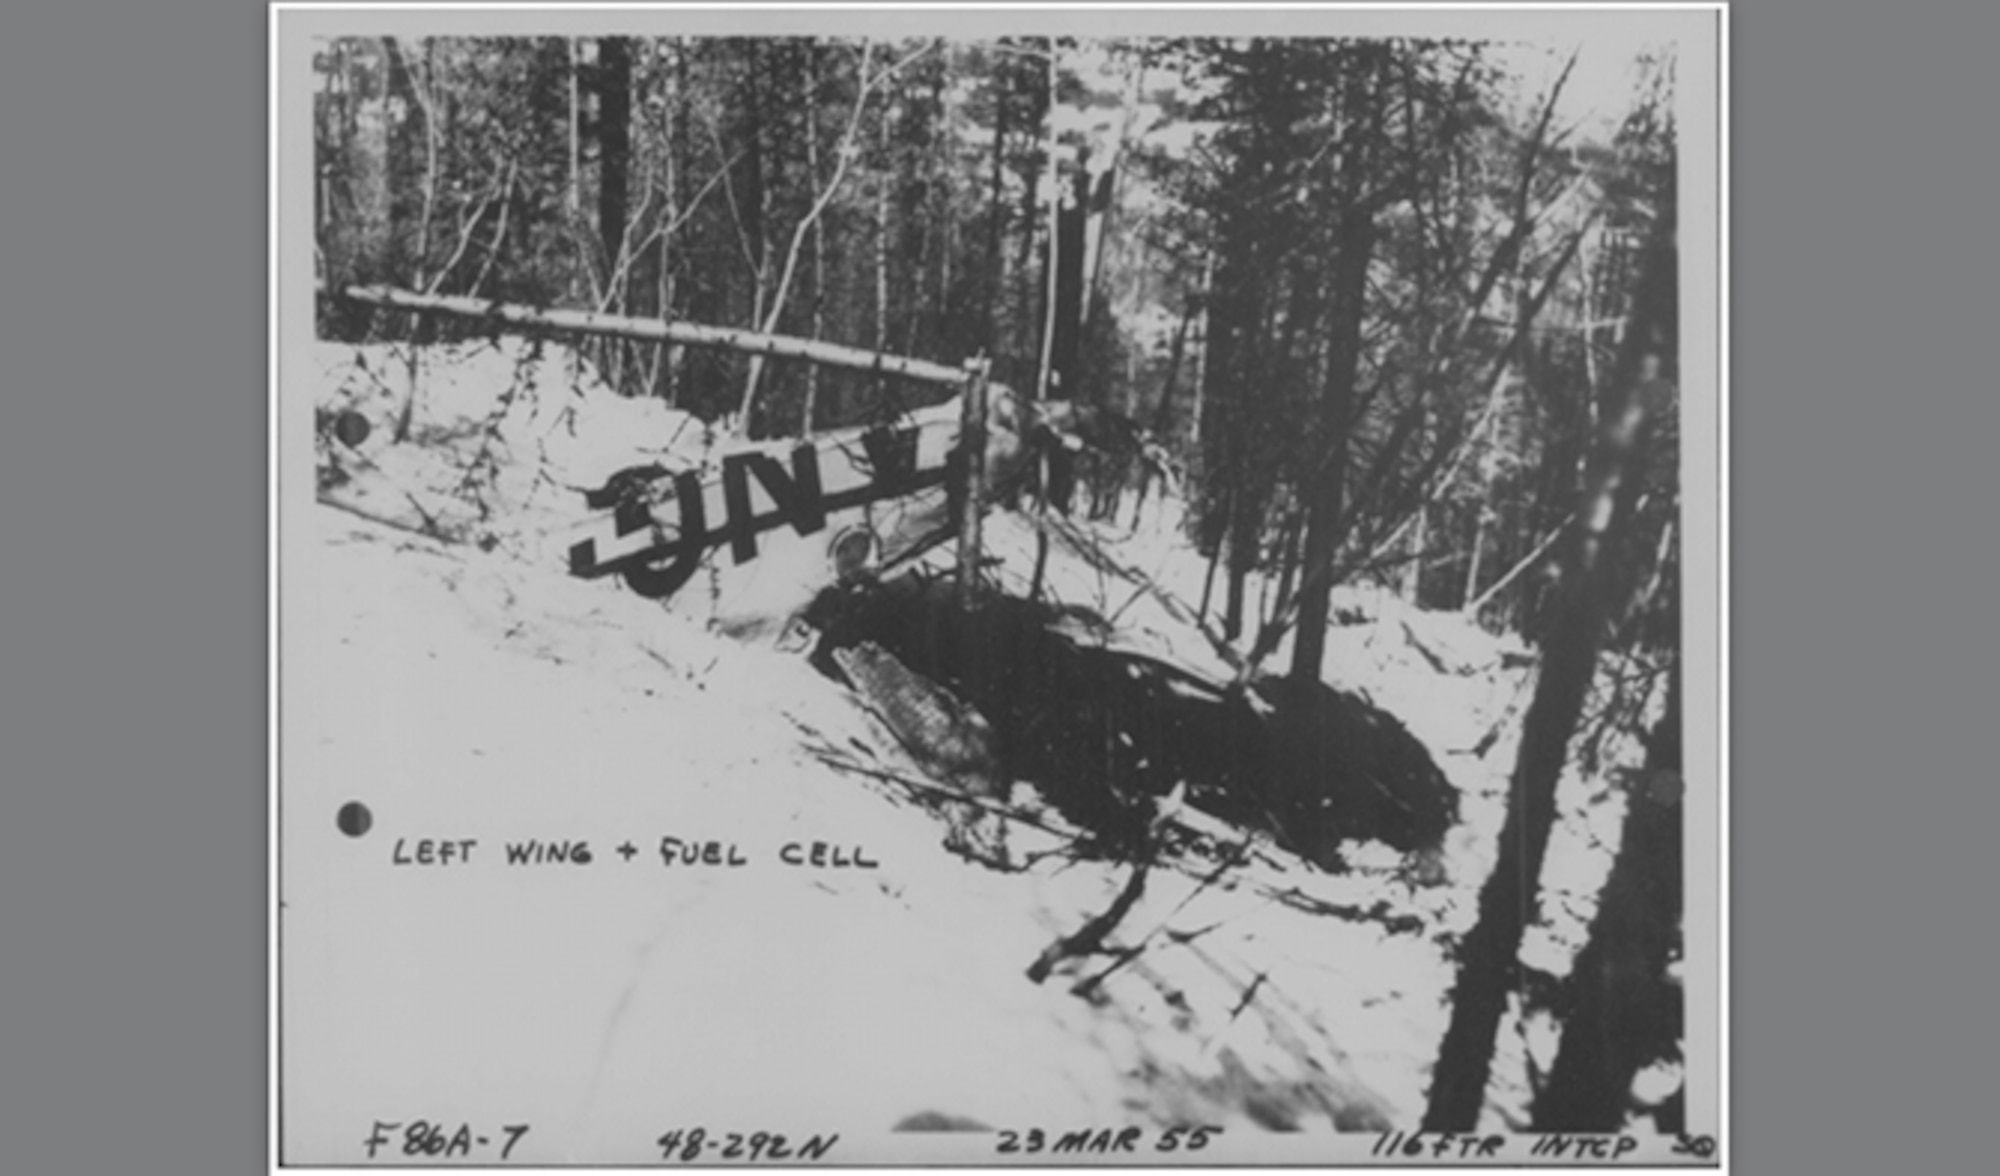 The Washington National Guard F-86 Sabre crash site March 23, 1955, near Timber Mountain, Colville National Forest. Maj. John C. Seeley, ejected from the jet at an altitude of approximately 12,000 after fighting a tight downward spin during the descent. (Courtesy Photo)